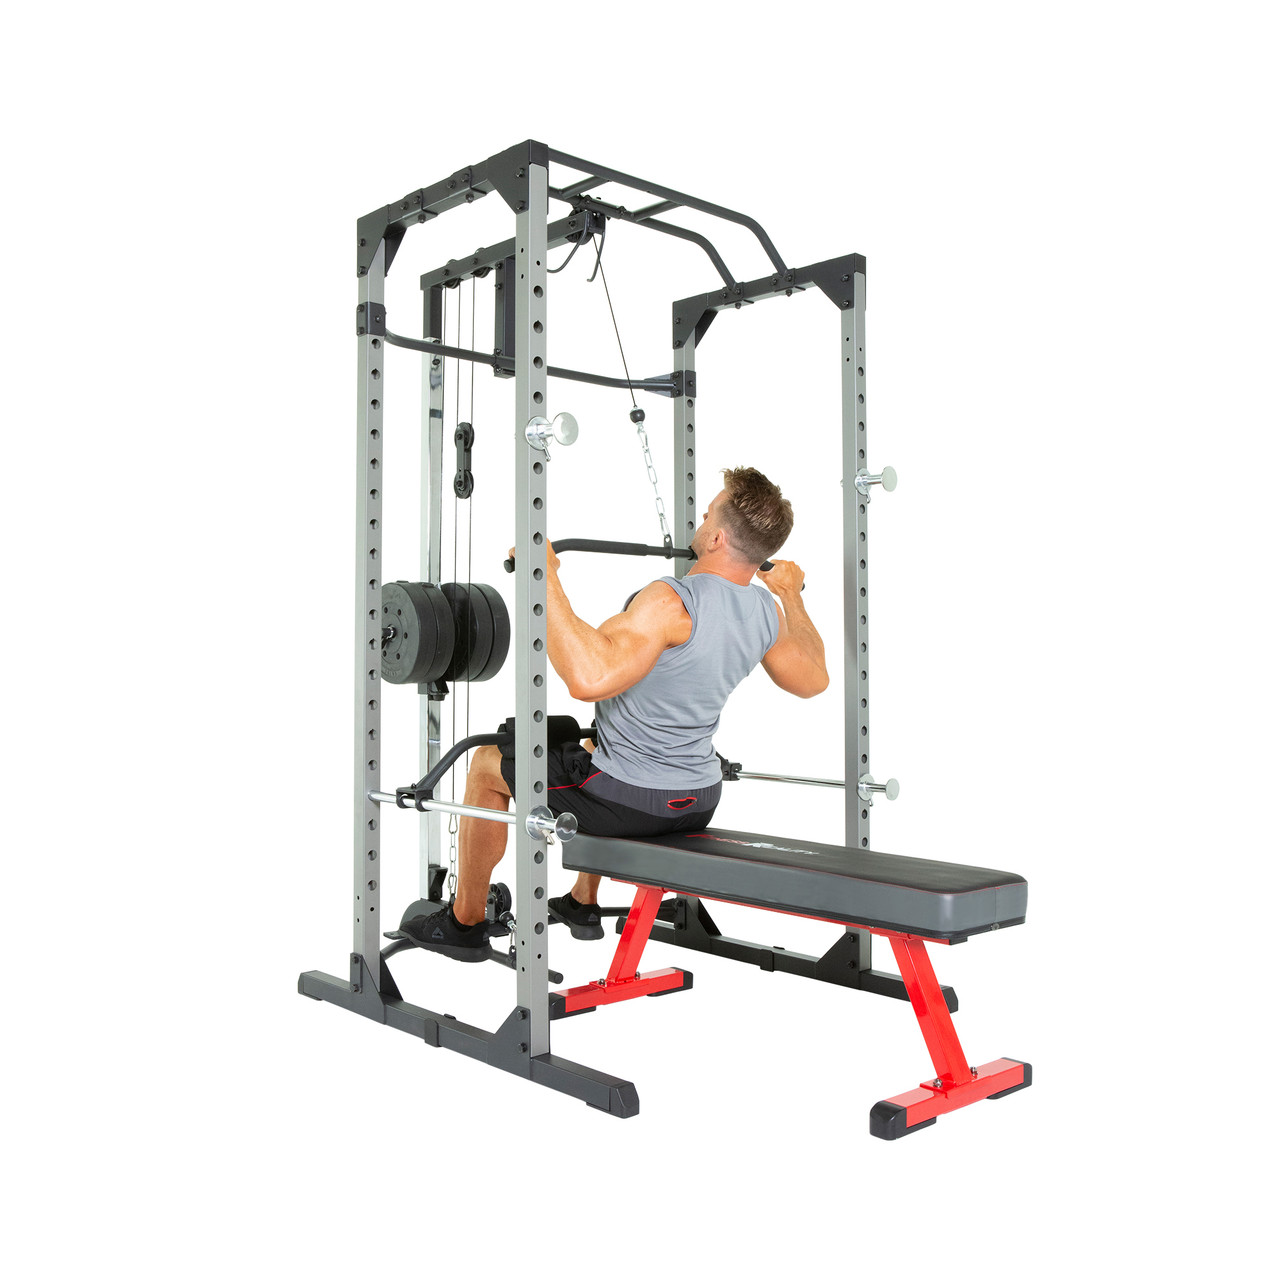 Fitness Reality 810XLT Squat Rack: Pros, Cons, and Alternates